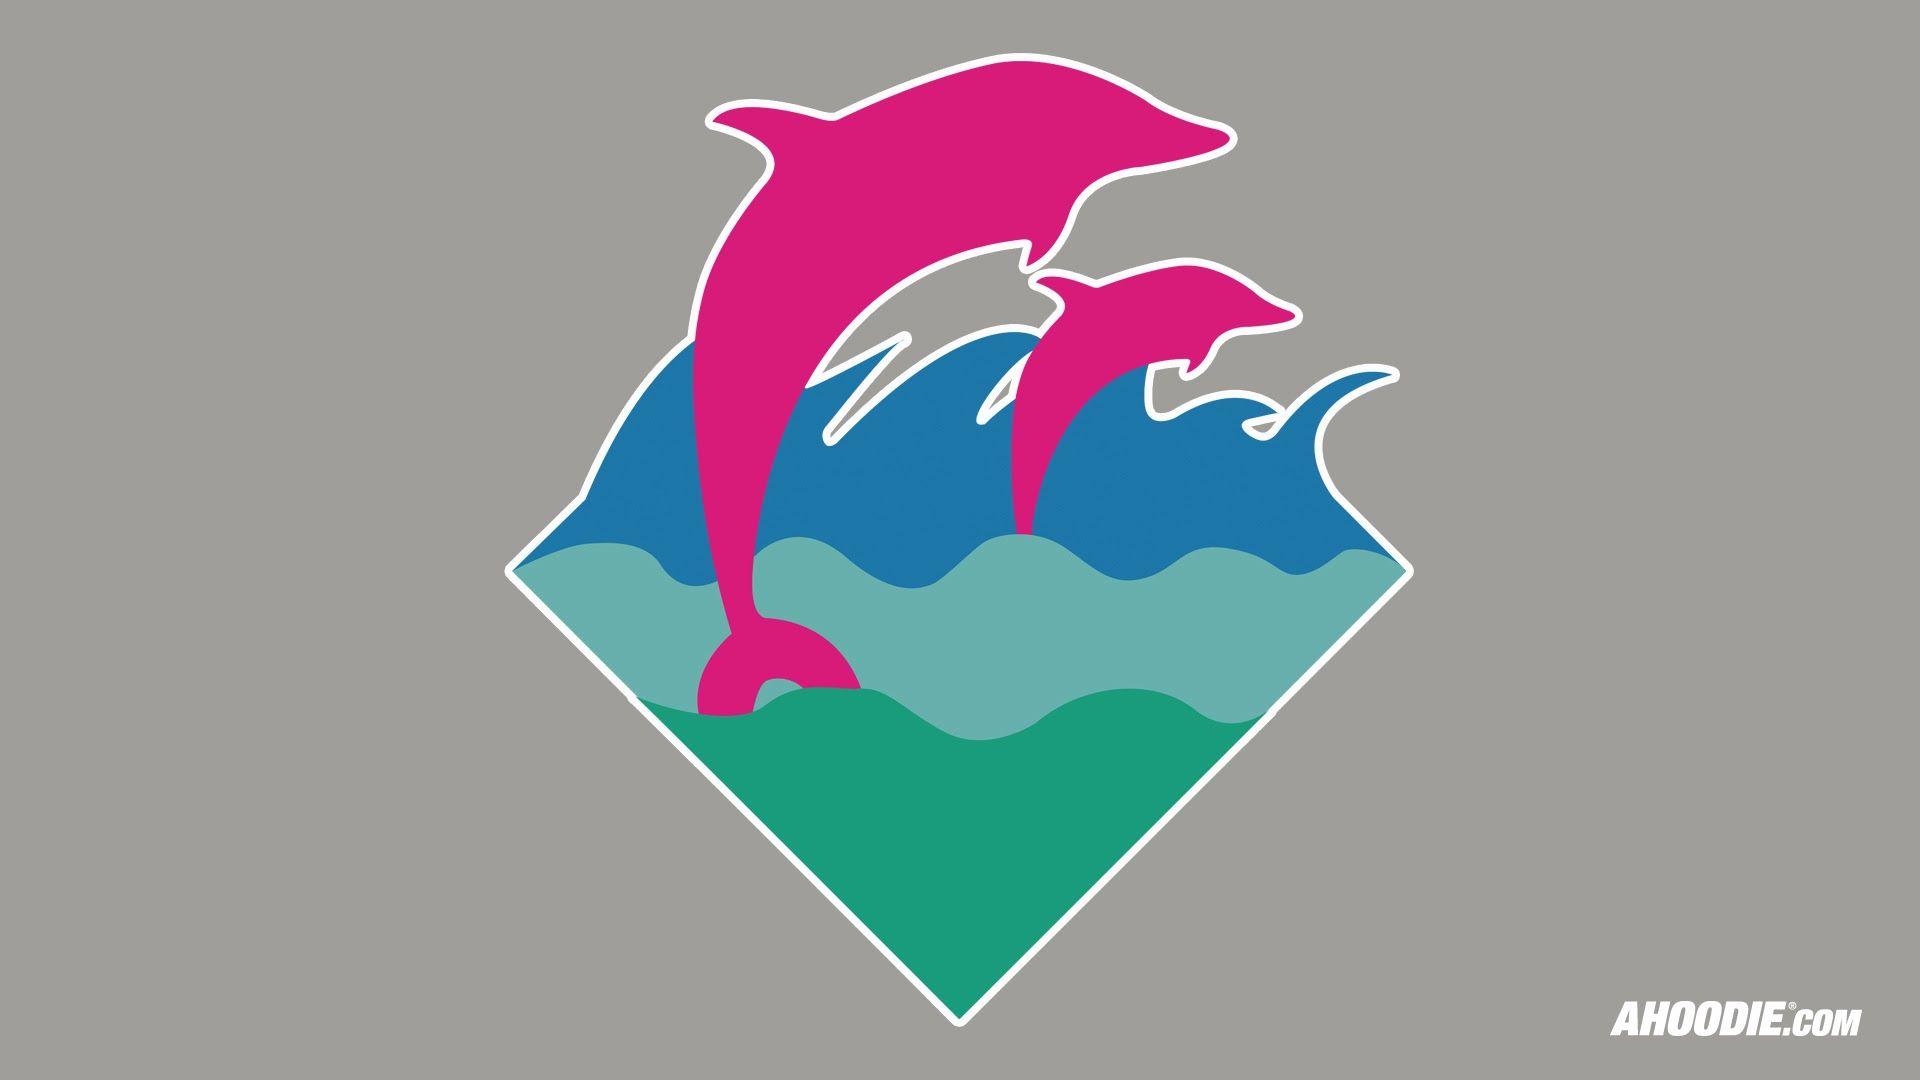 Pink Dolphin Logo - Pictures of Pink Dolphin Promo Logo - kidskunst.info